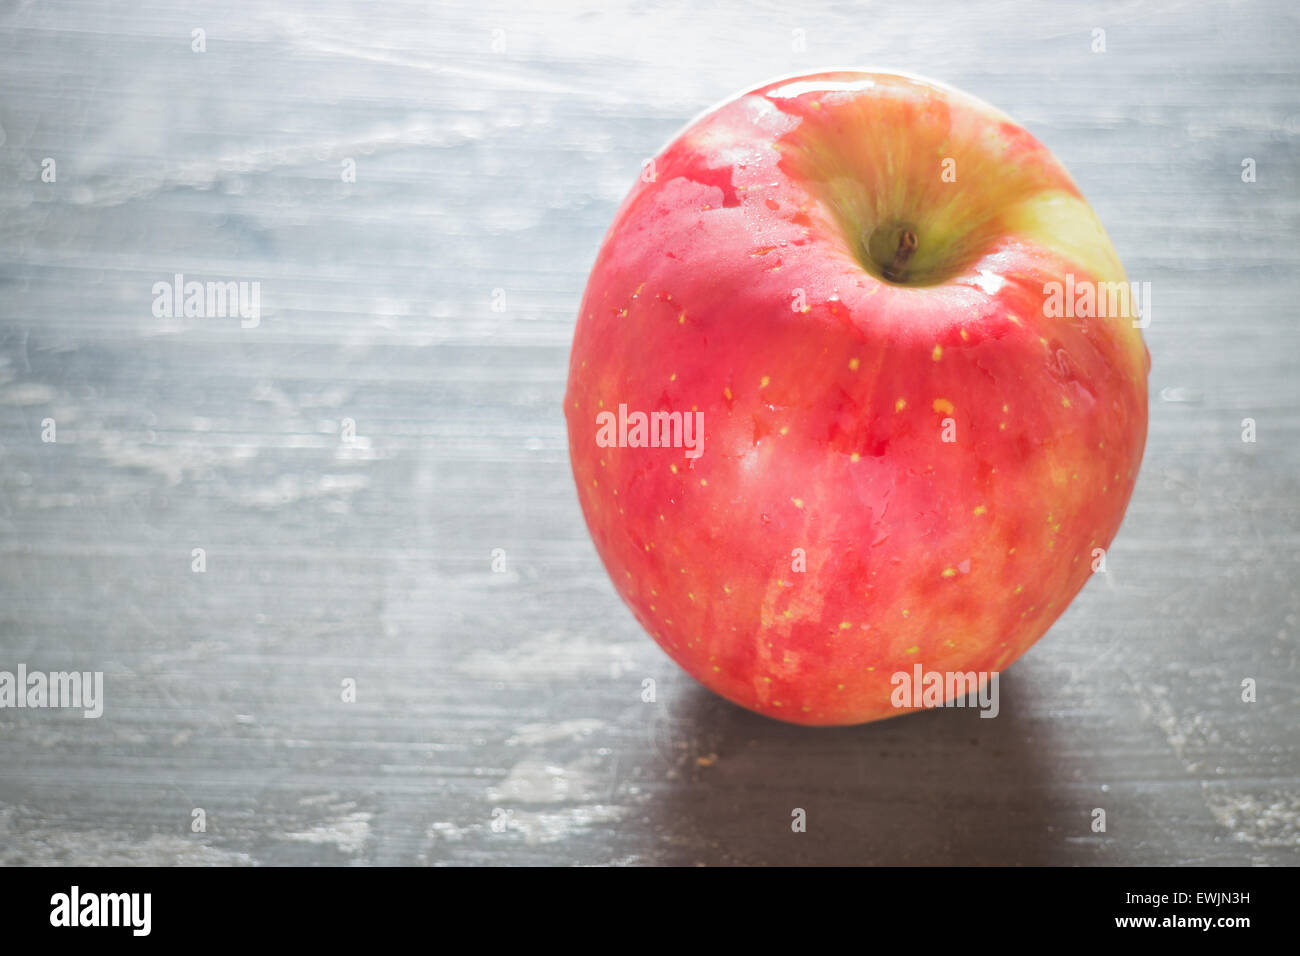 Red apple on the table, stock photo Stock Photo